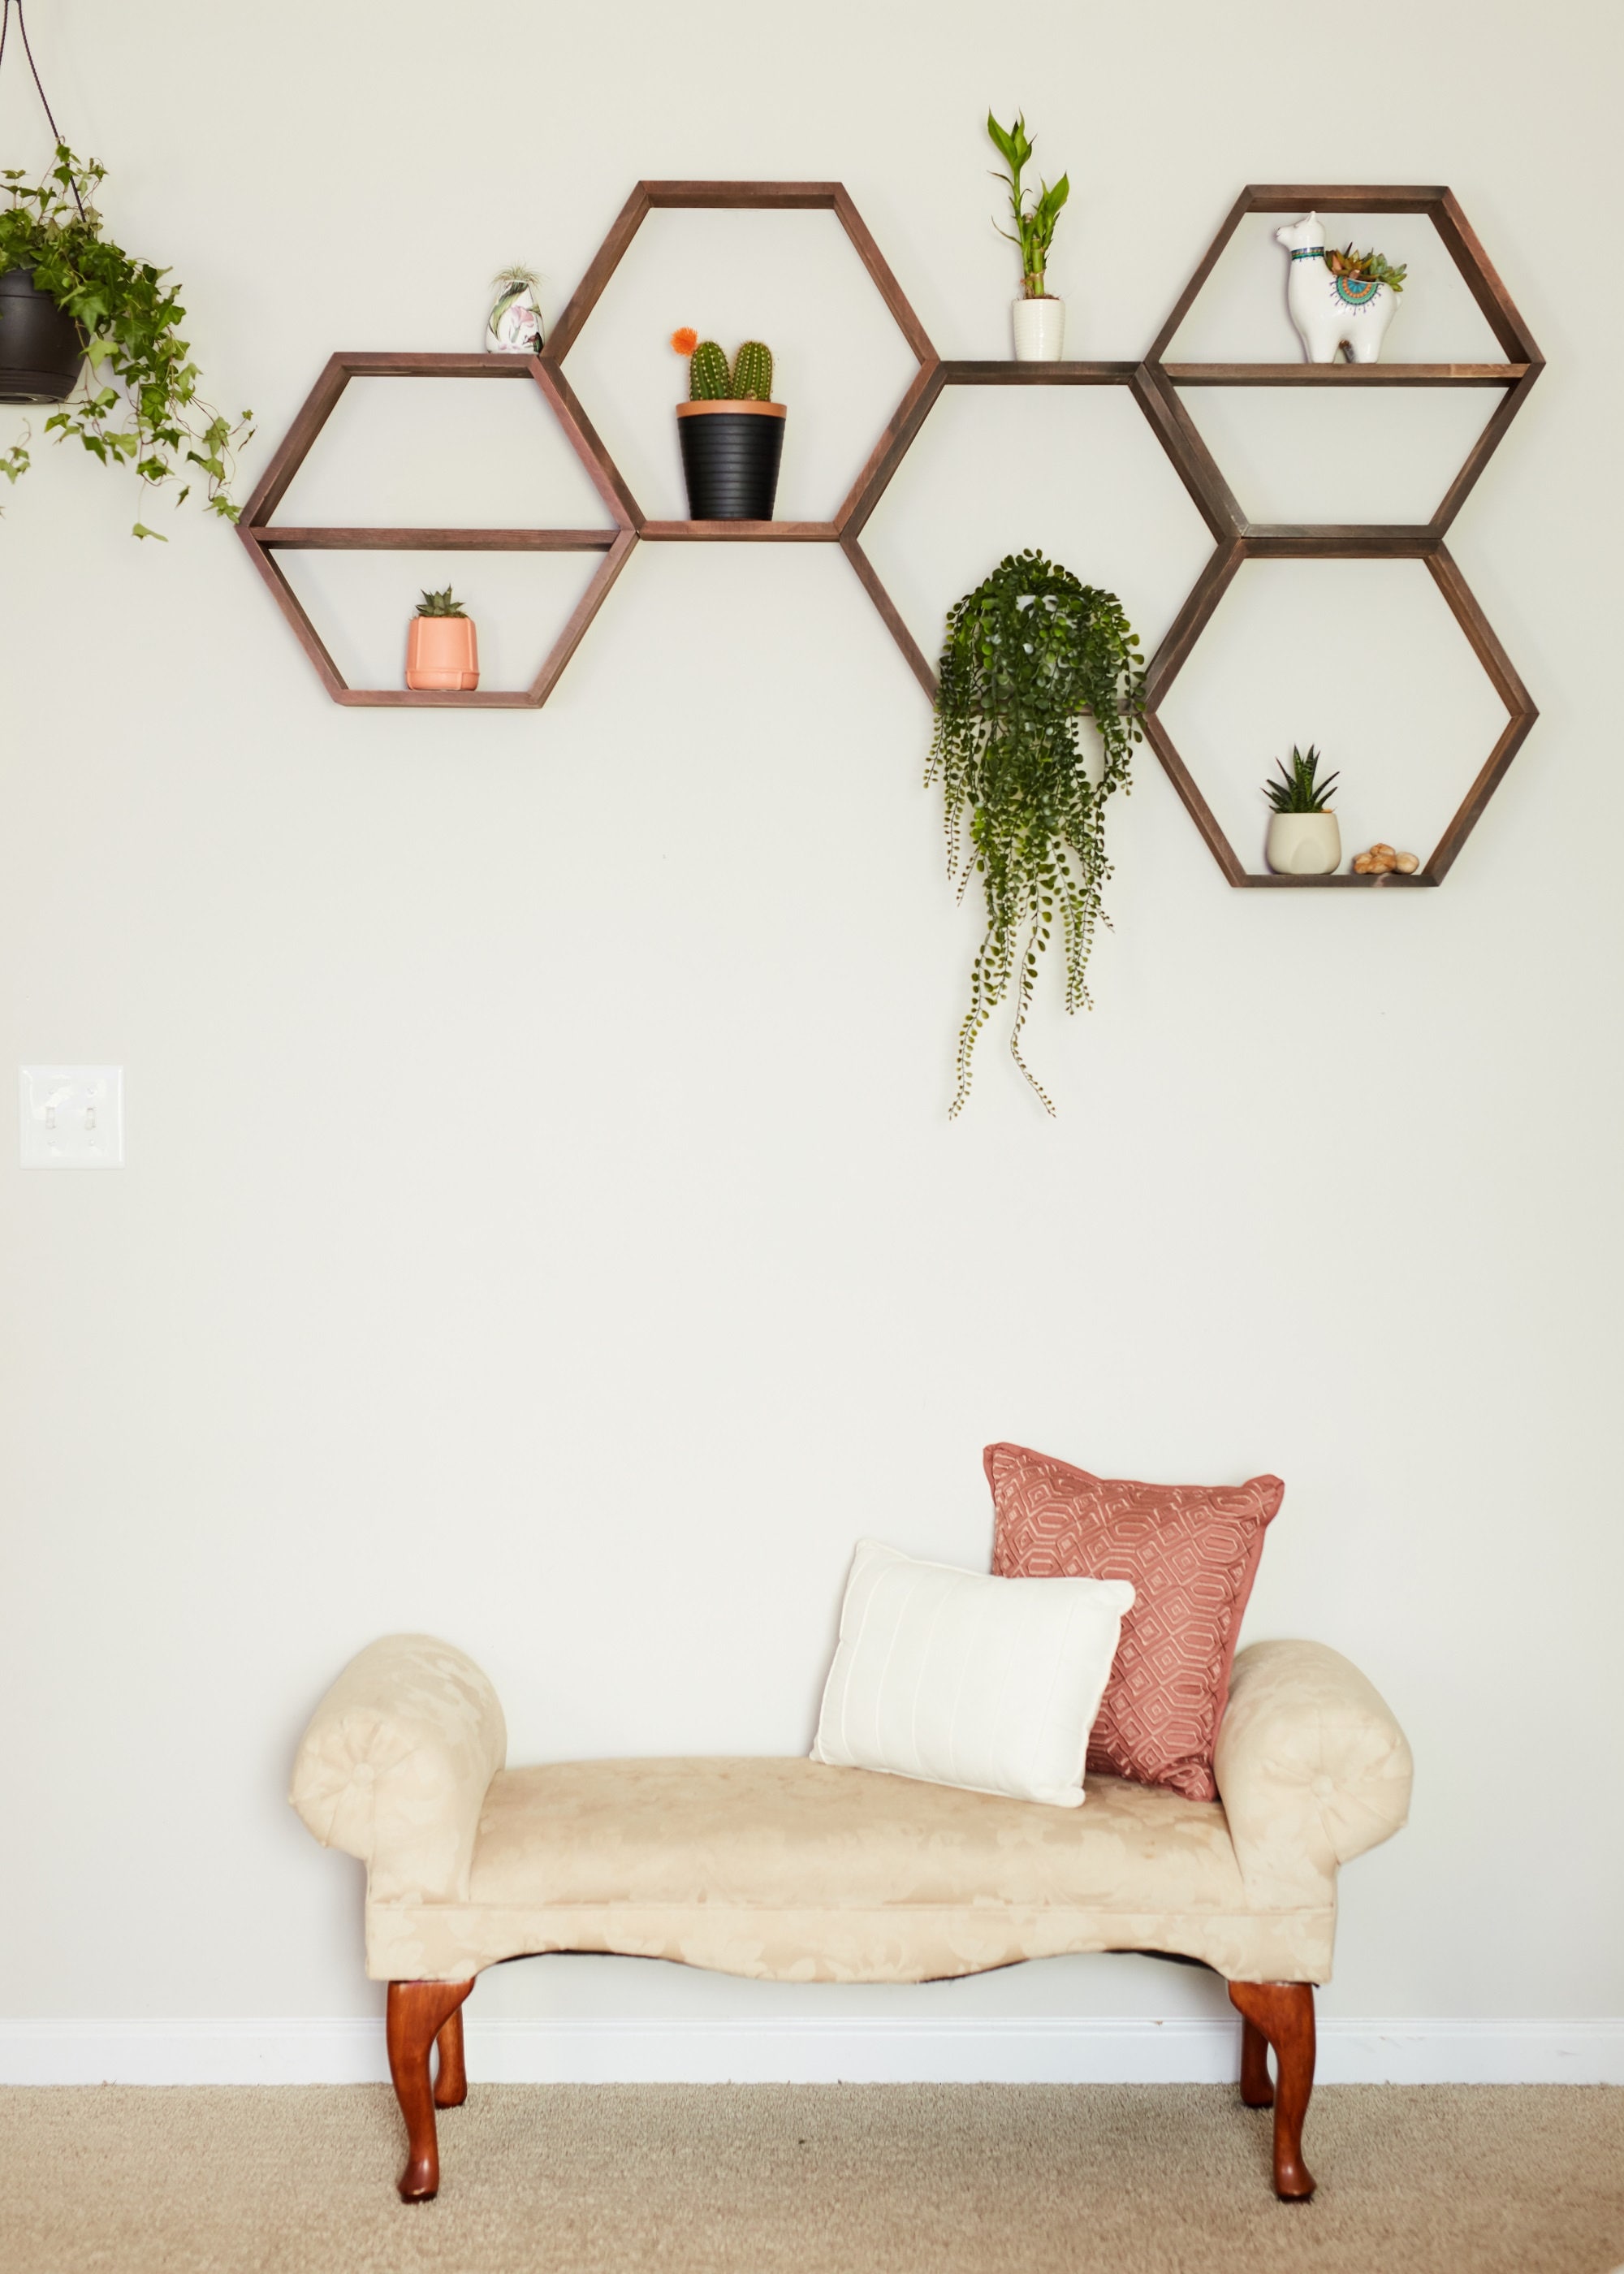 How To Decorate Honeycomb Shelves - Katie's Bliss